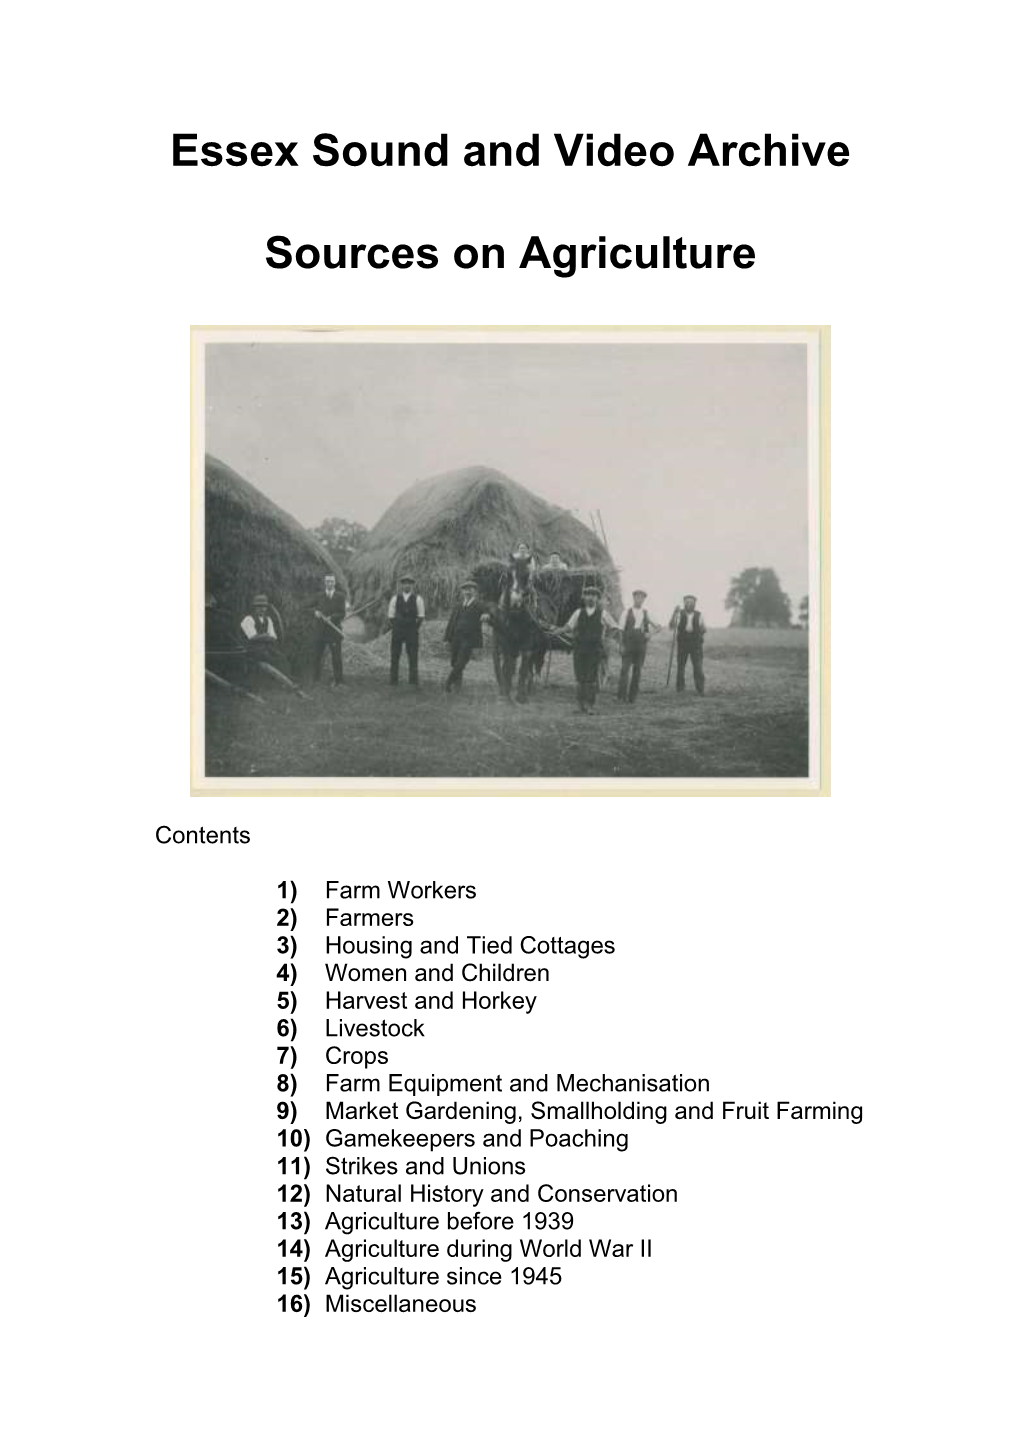 Essex Sound and Video Archive Sources on Agriculture